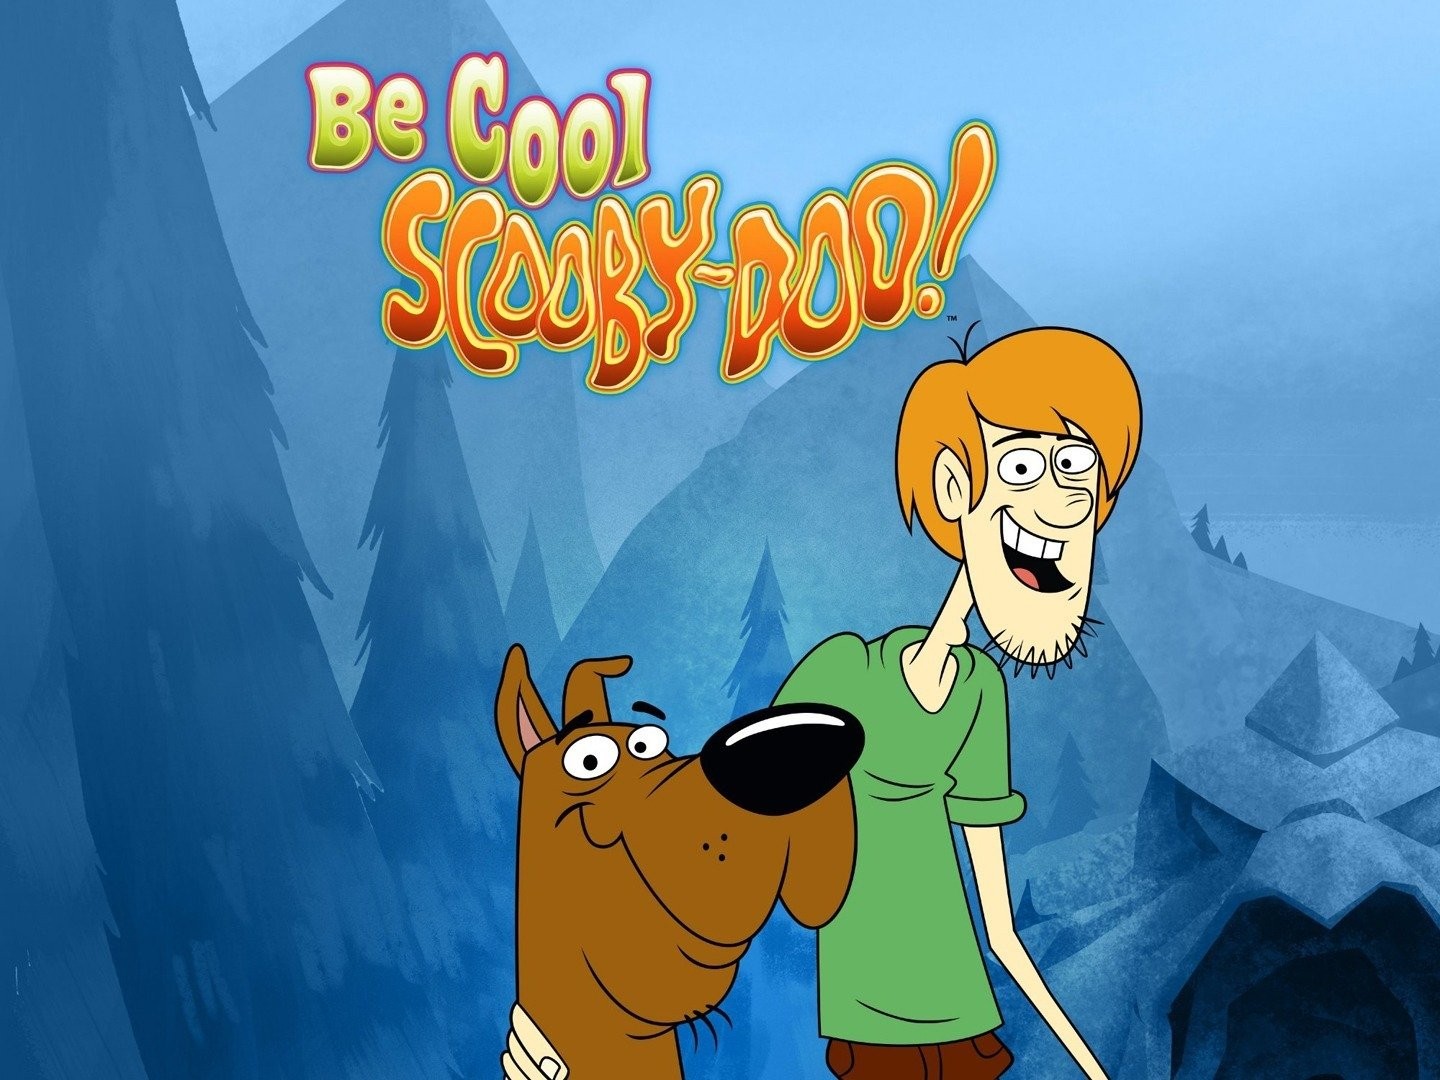 Be cool scooby doo shaggy